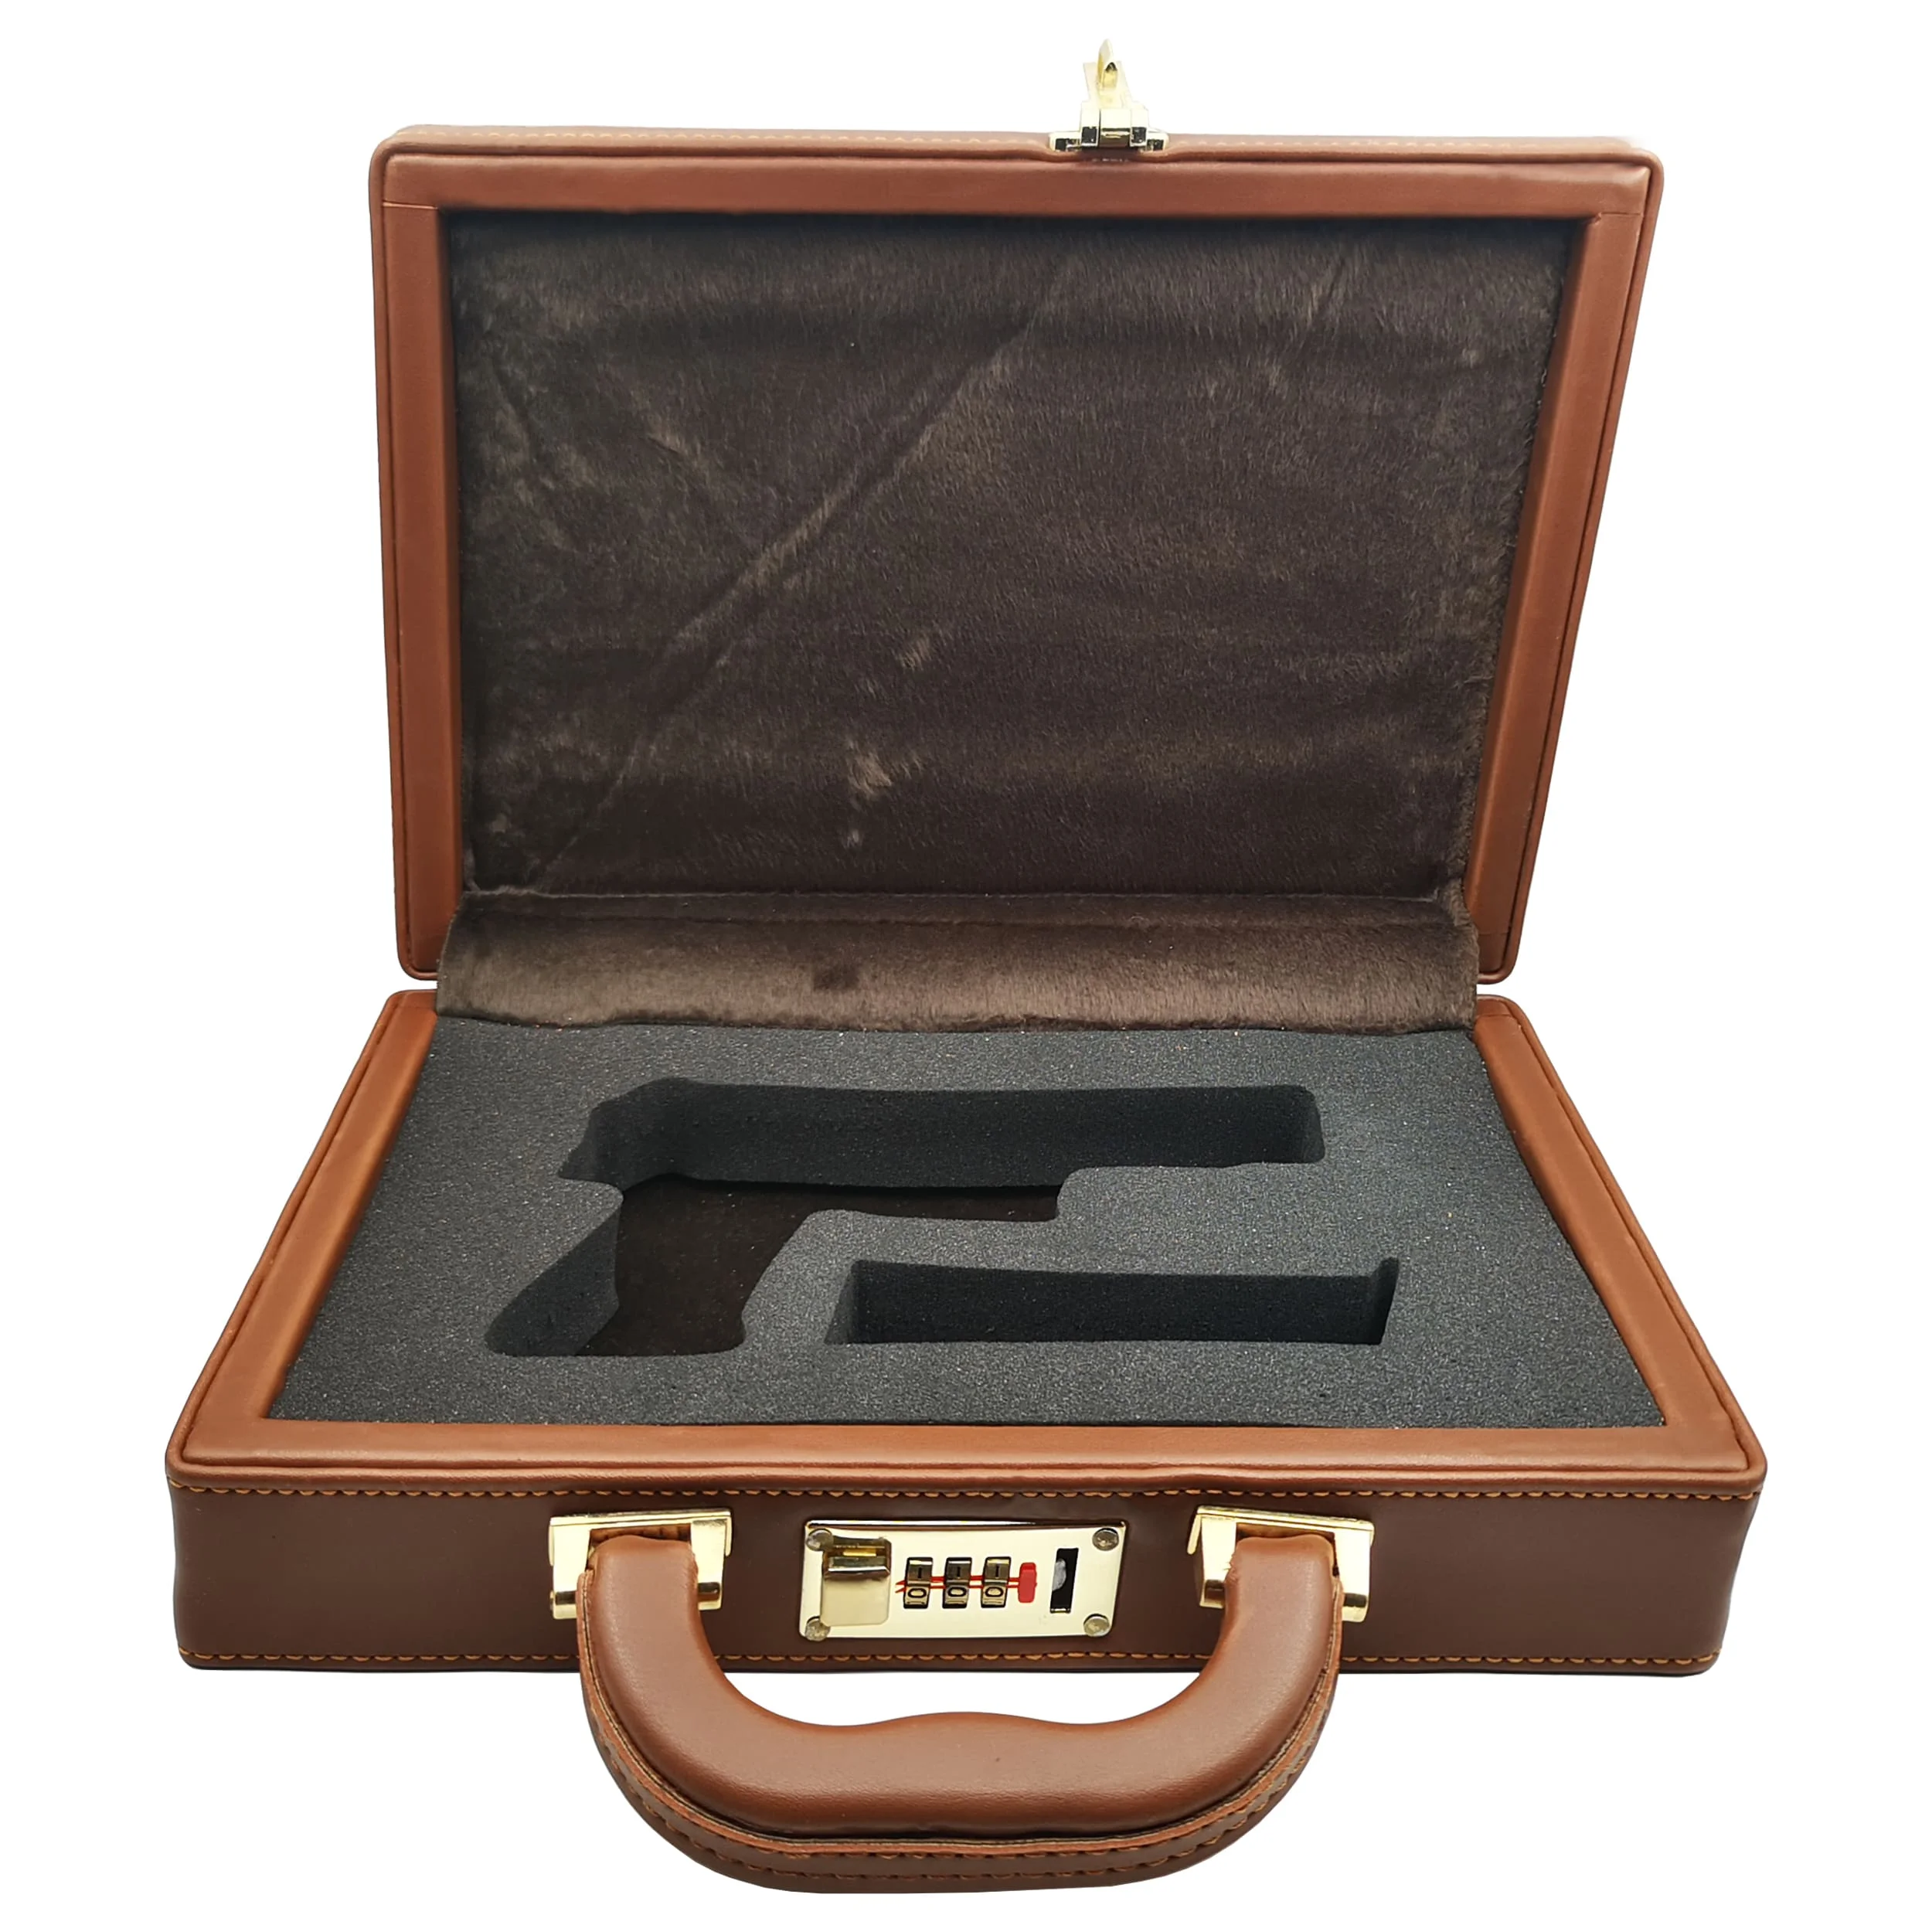 Luger P08 Parabellum Special Leather Gun Case Bond Style Personalized Password Lock System Handgun Carry And Storage Box